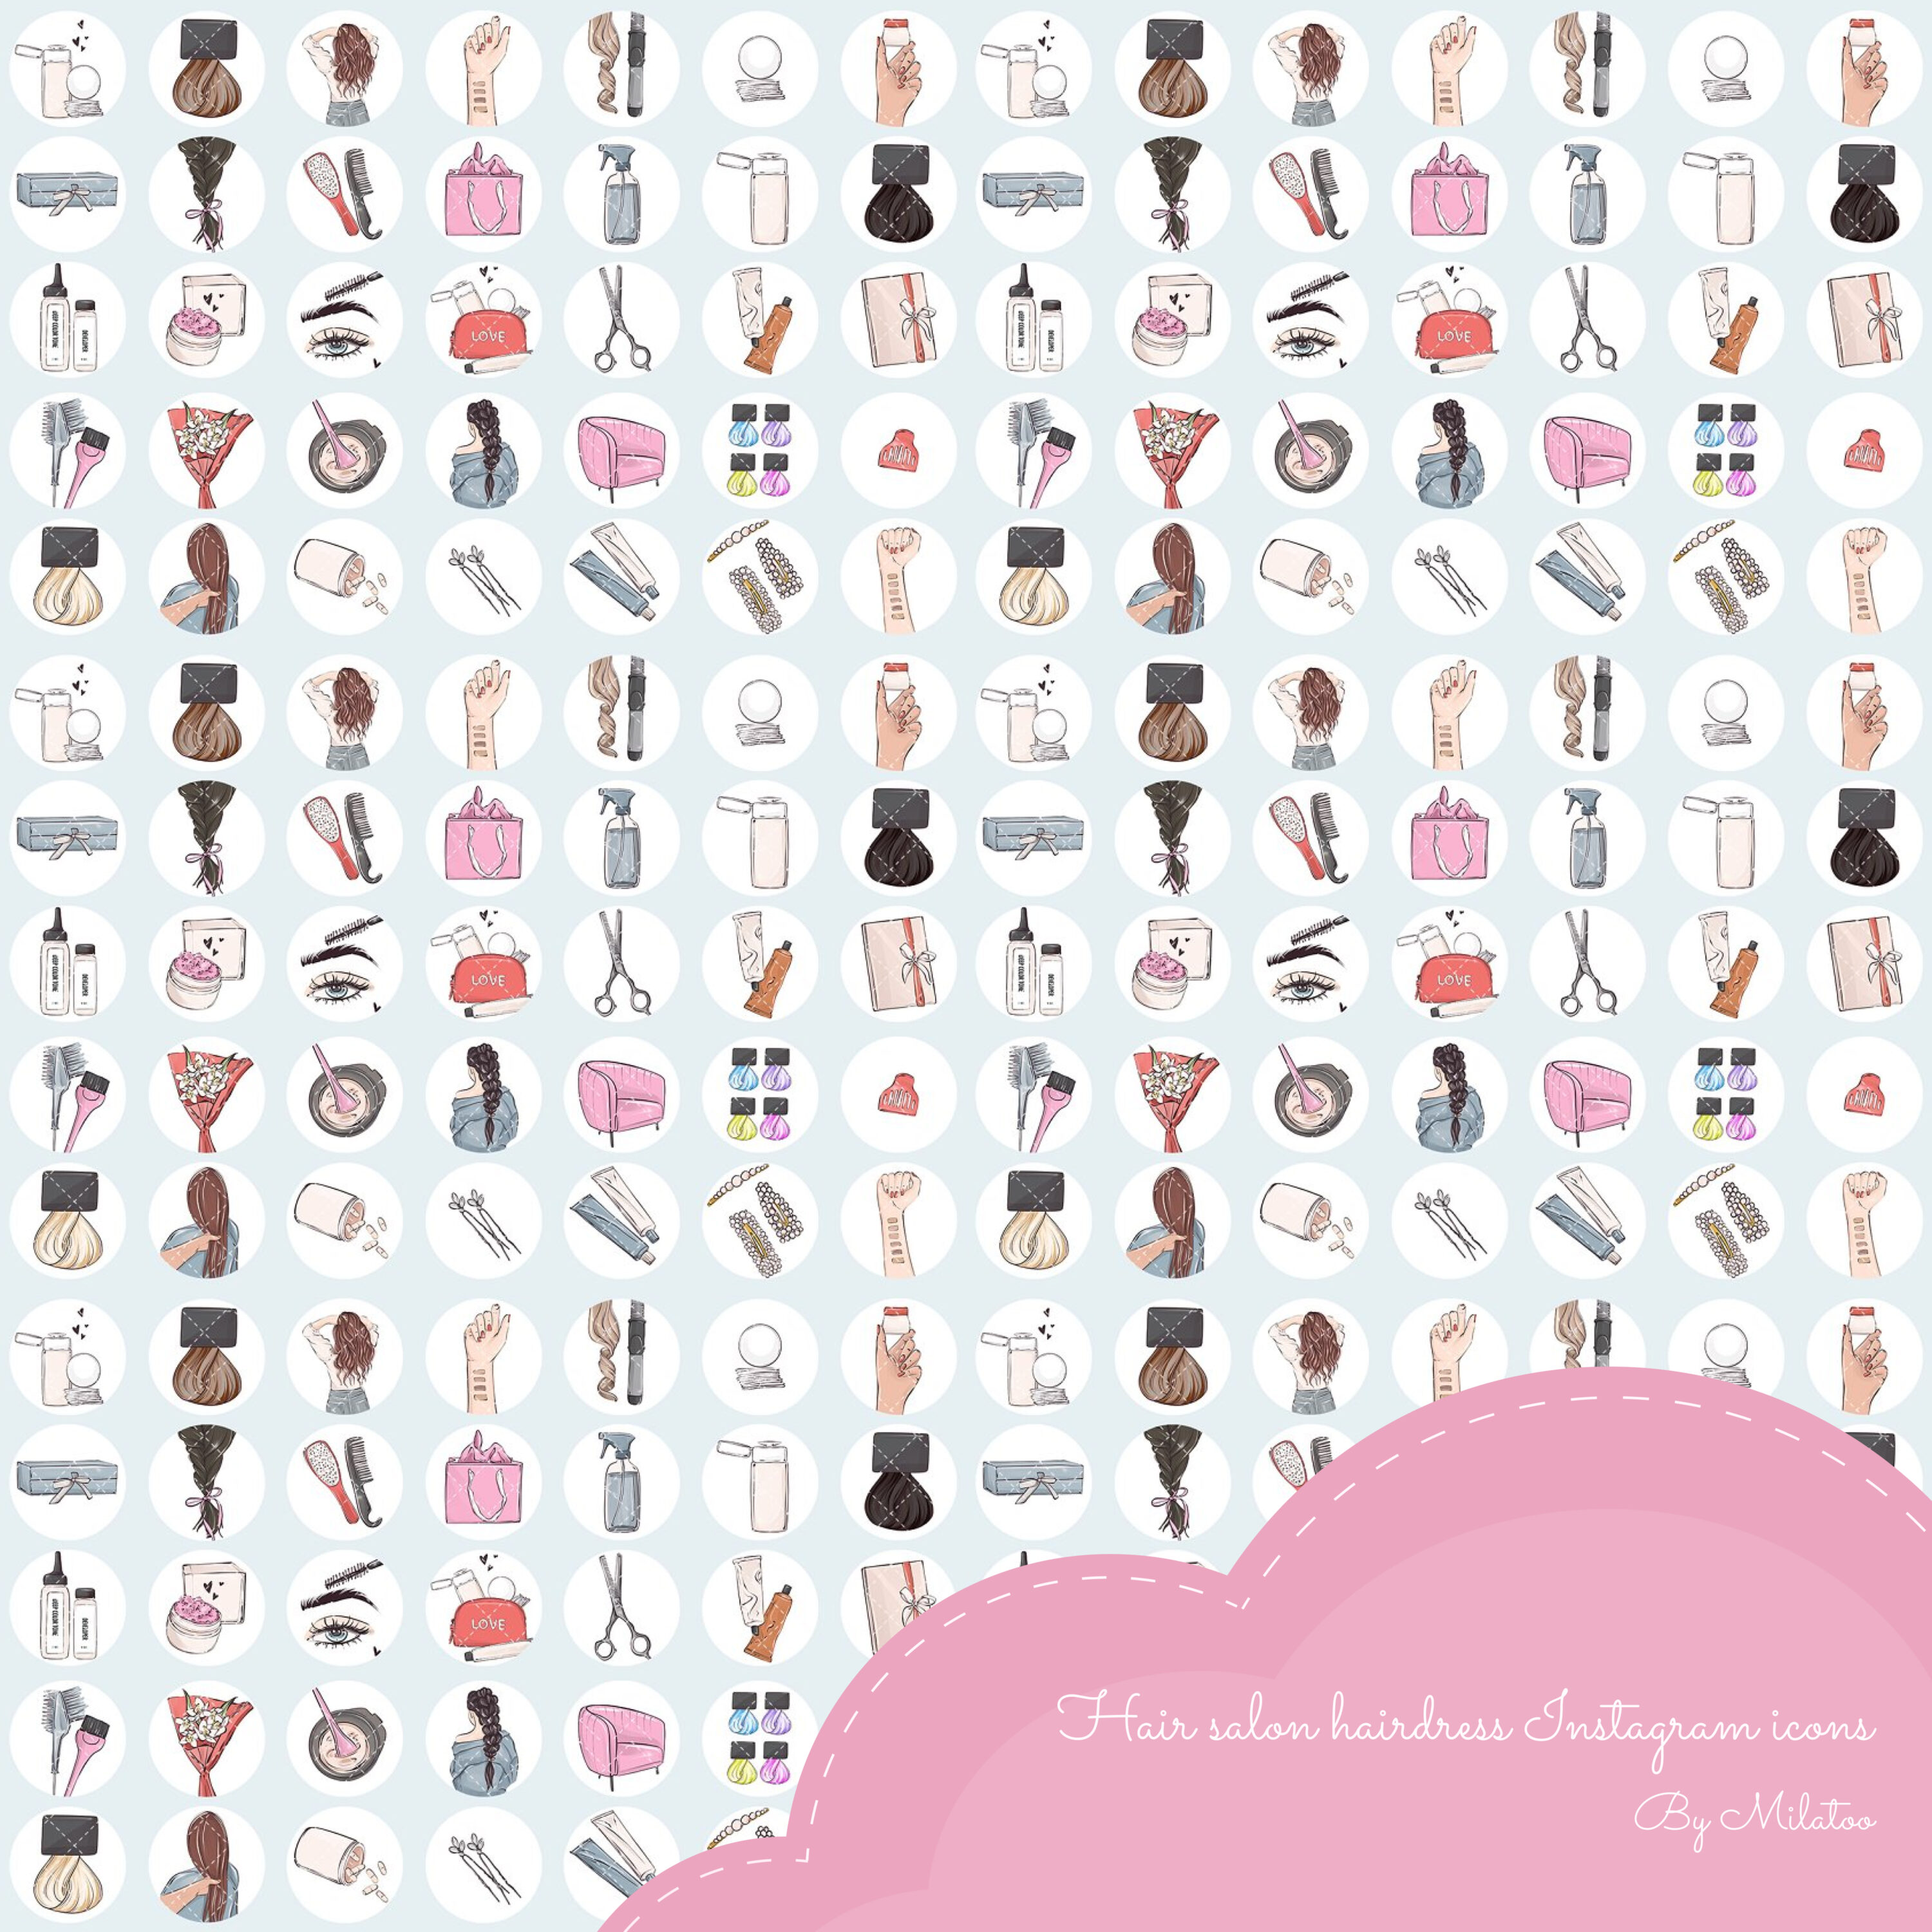 Preview hair salon hairdress instagram icons.